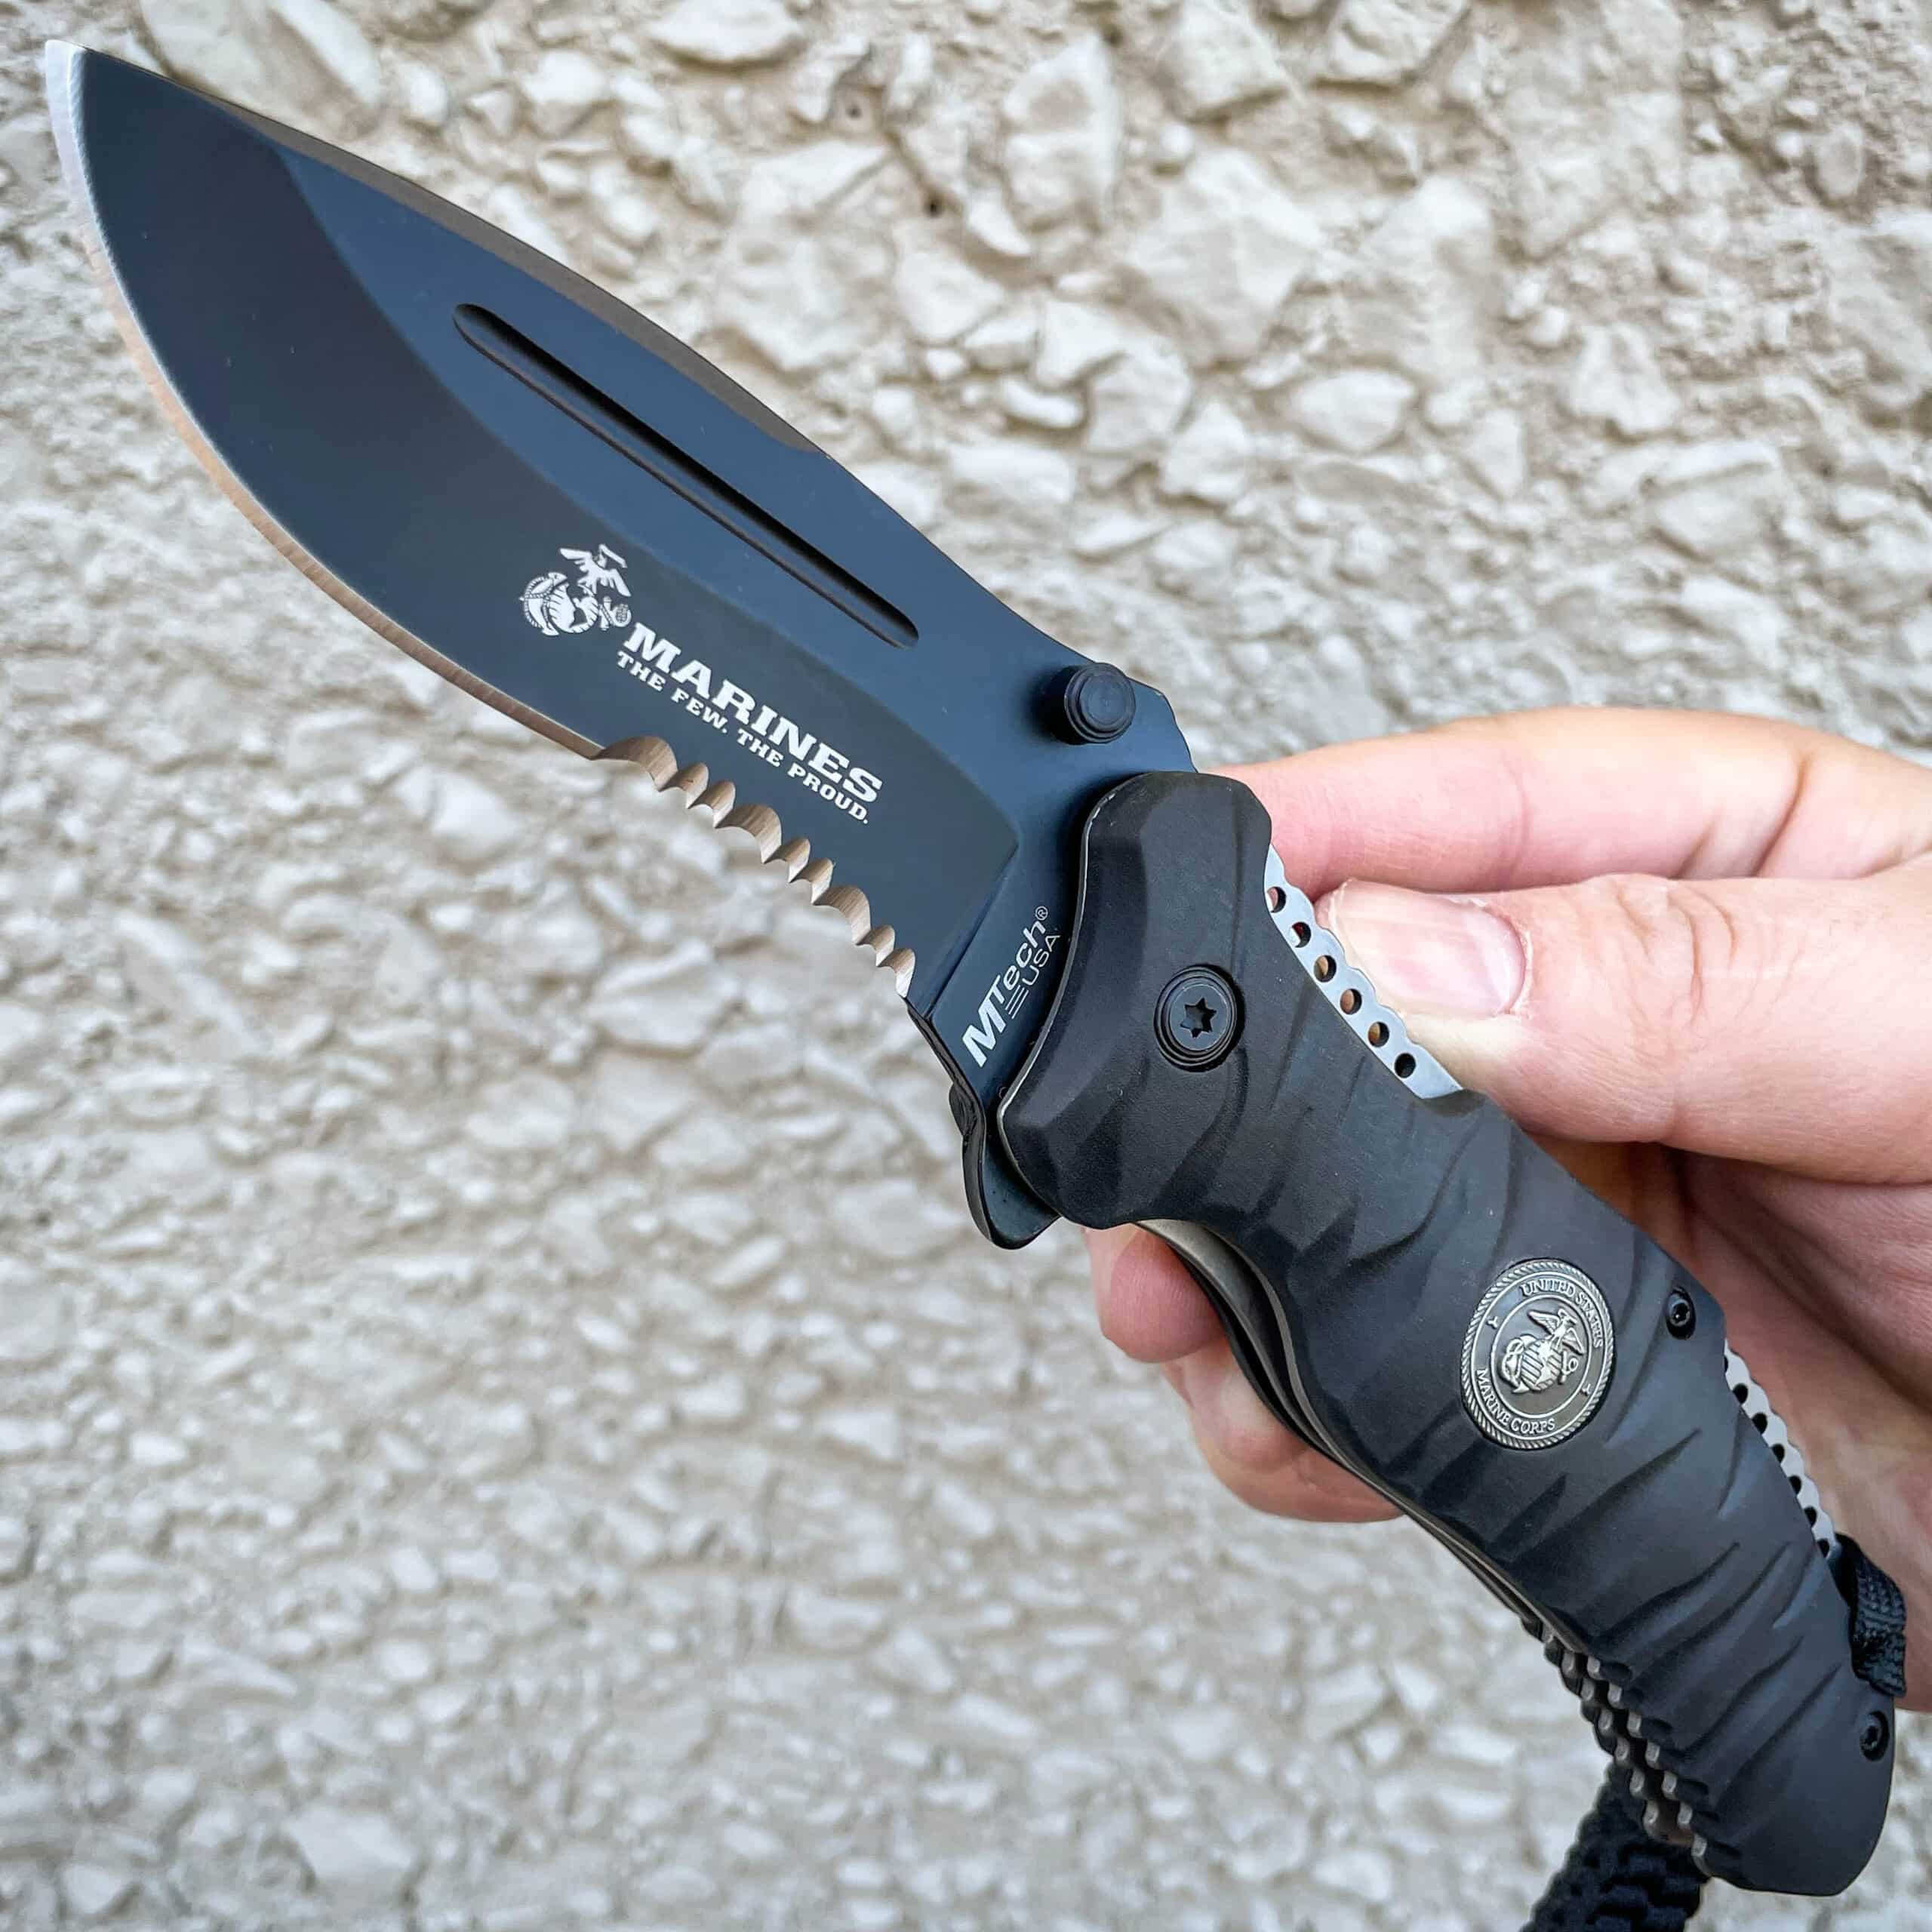 8.25″ USMC Marines Black Military Spring Assisted Open Rescue Pocket Knife Blade